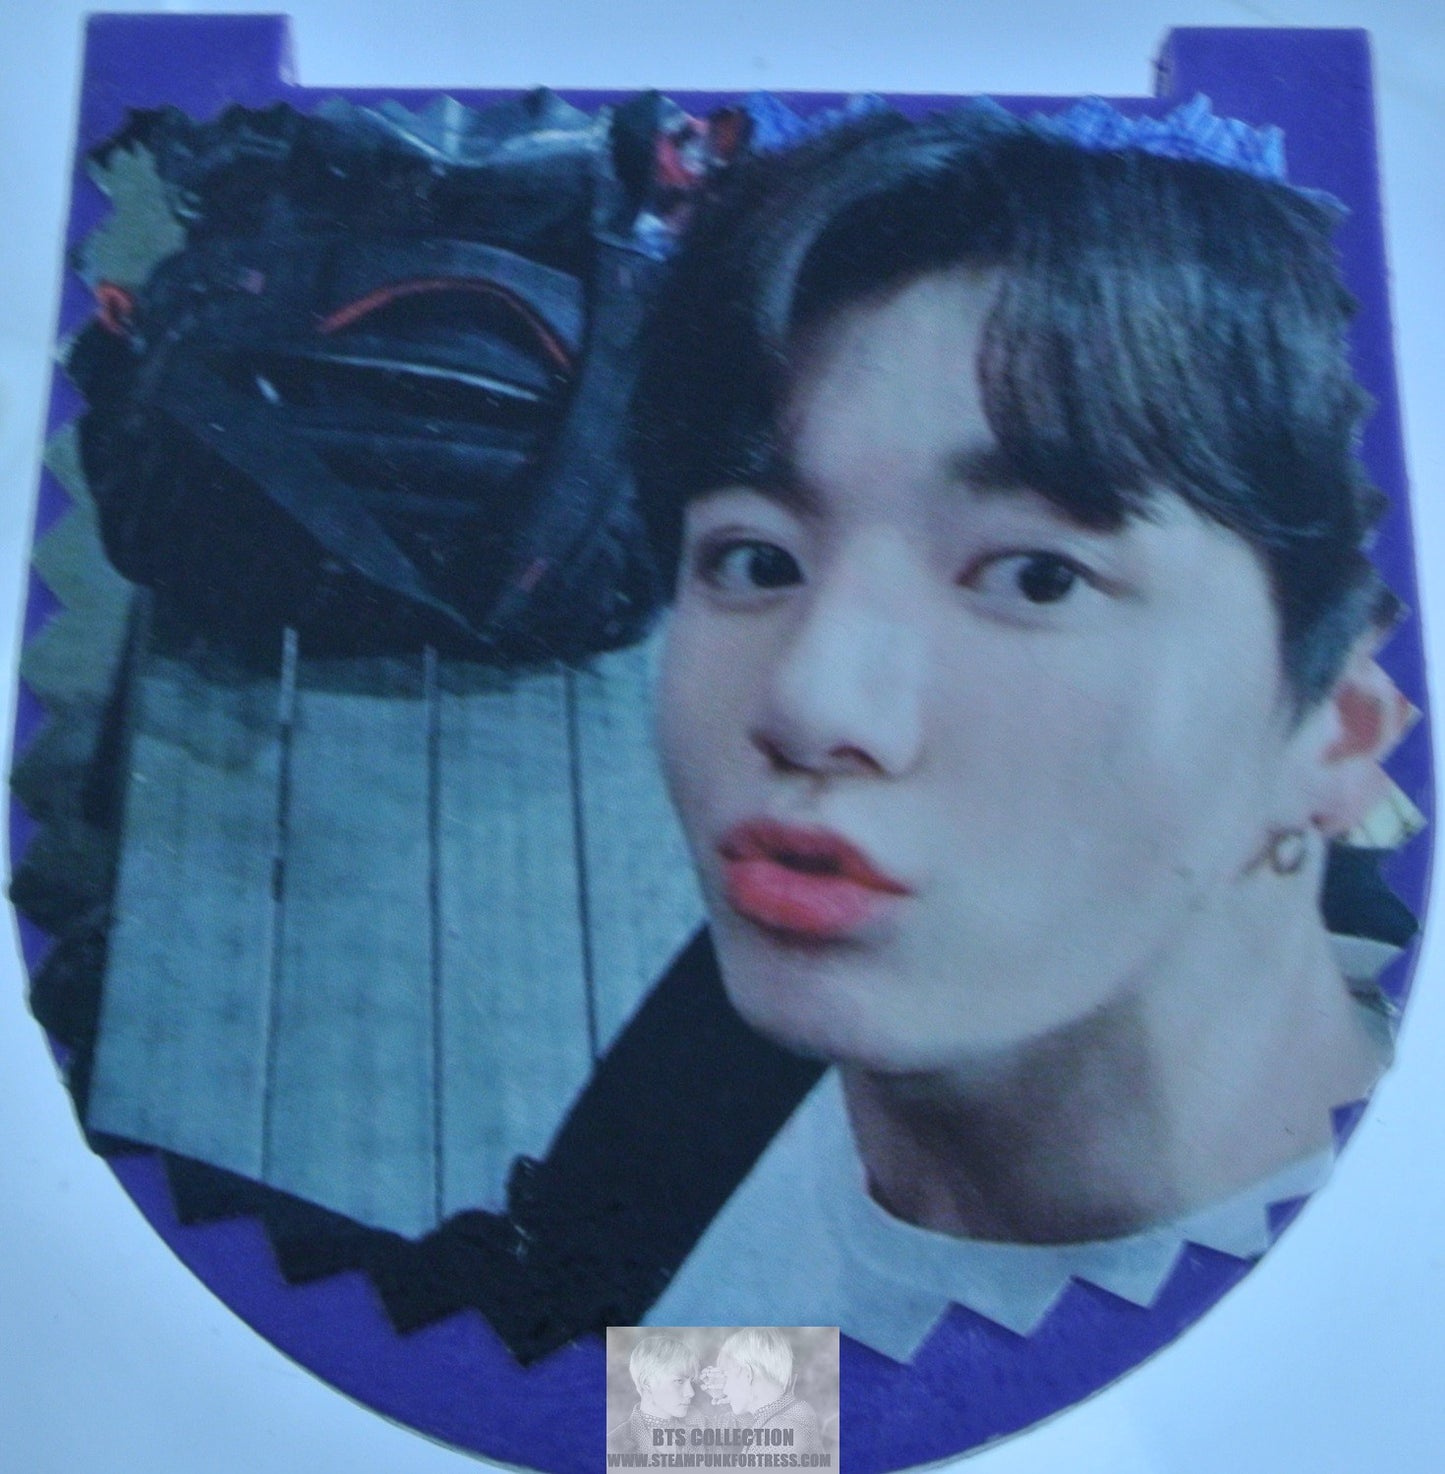 BTS JEON JUNGKOOK KISSING FACE MIRROR PURPLE ONE SIDE USED TO BE 2 SIDED